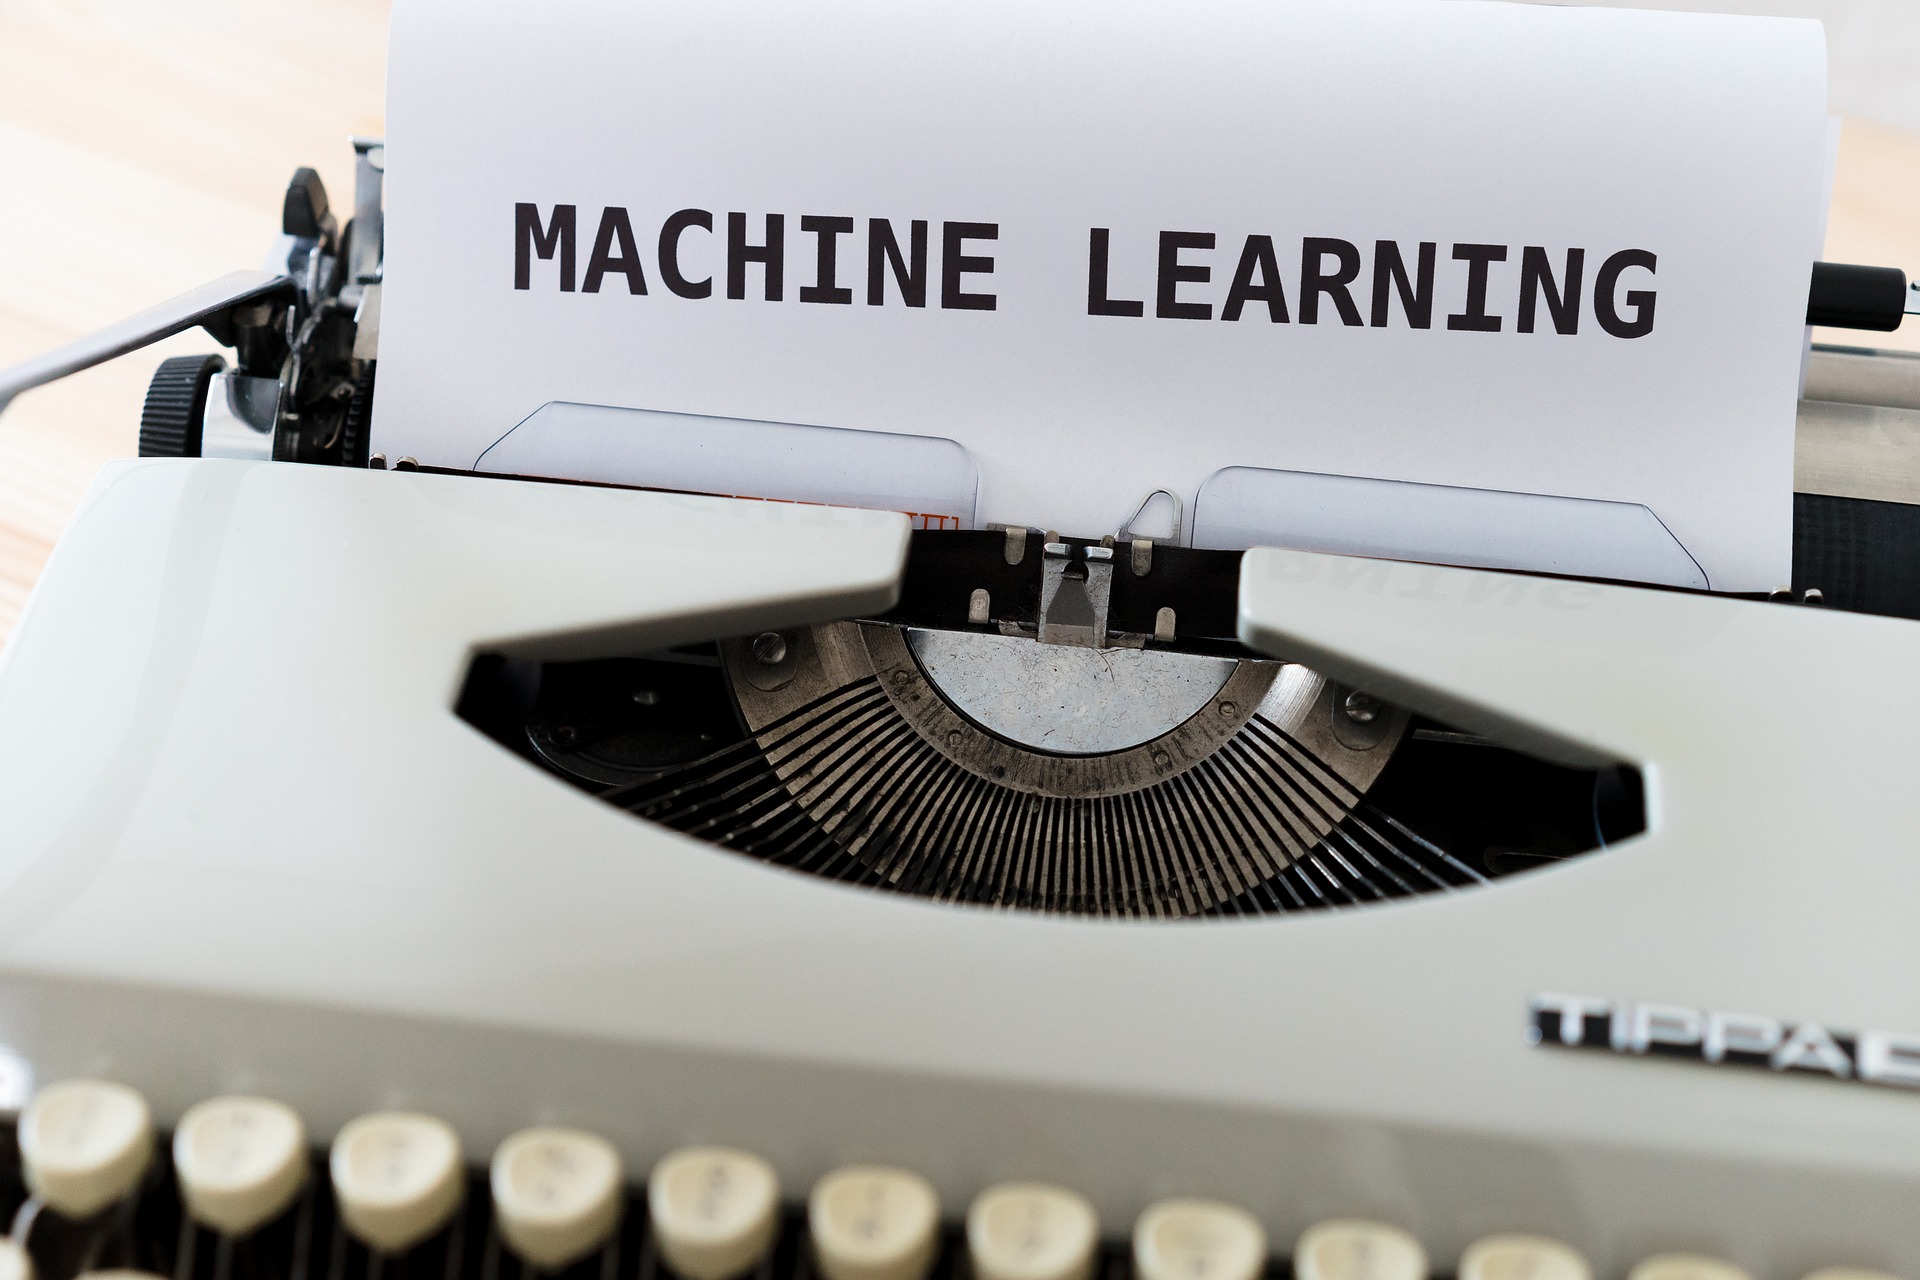 Are you new to machine learning? Use the benefits in a new way